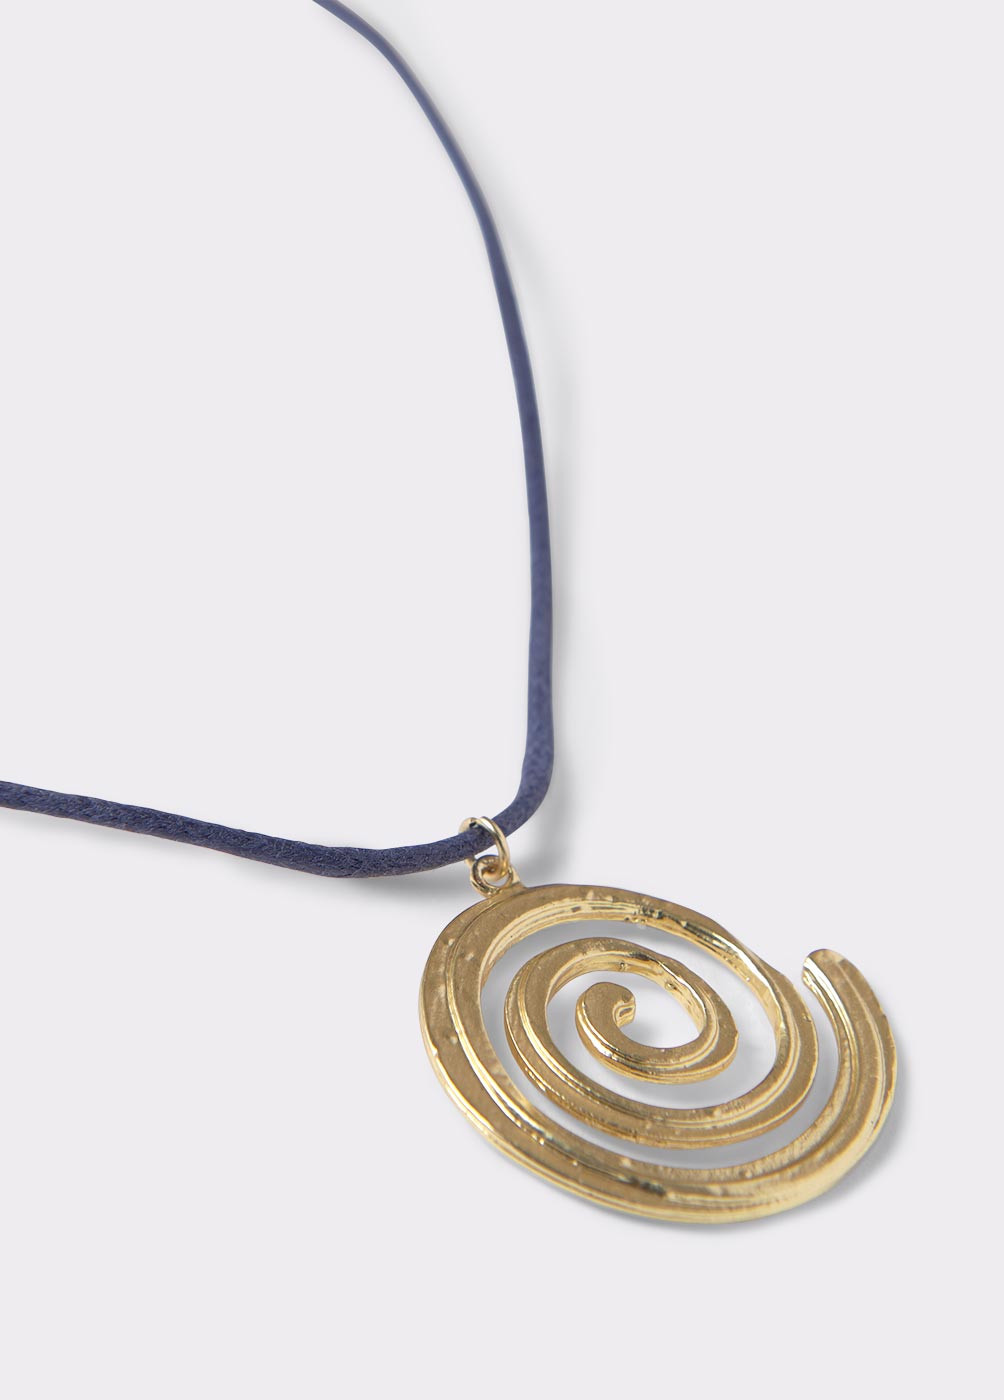 Spiral cord necklace